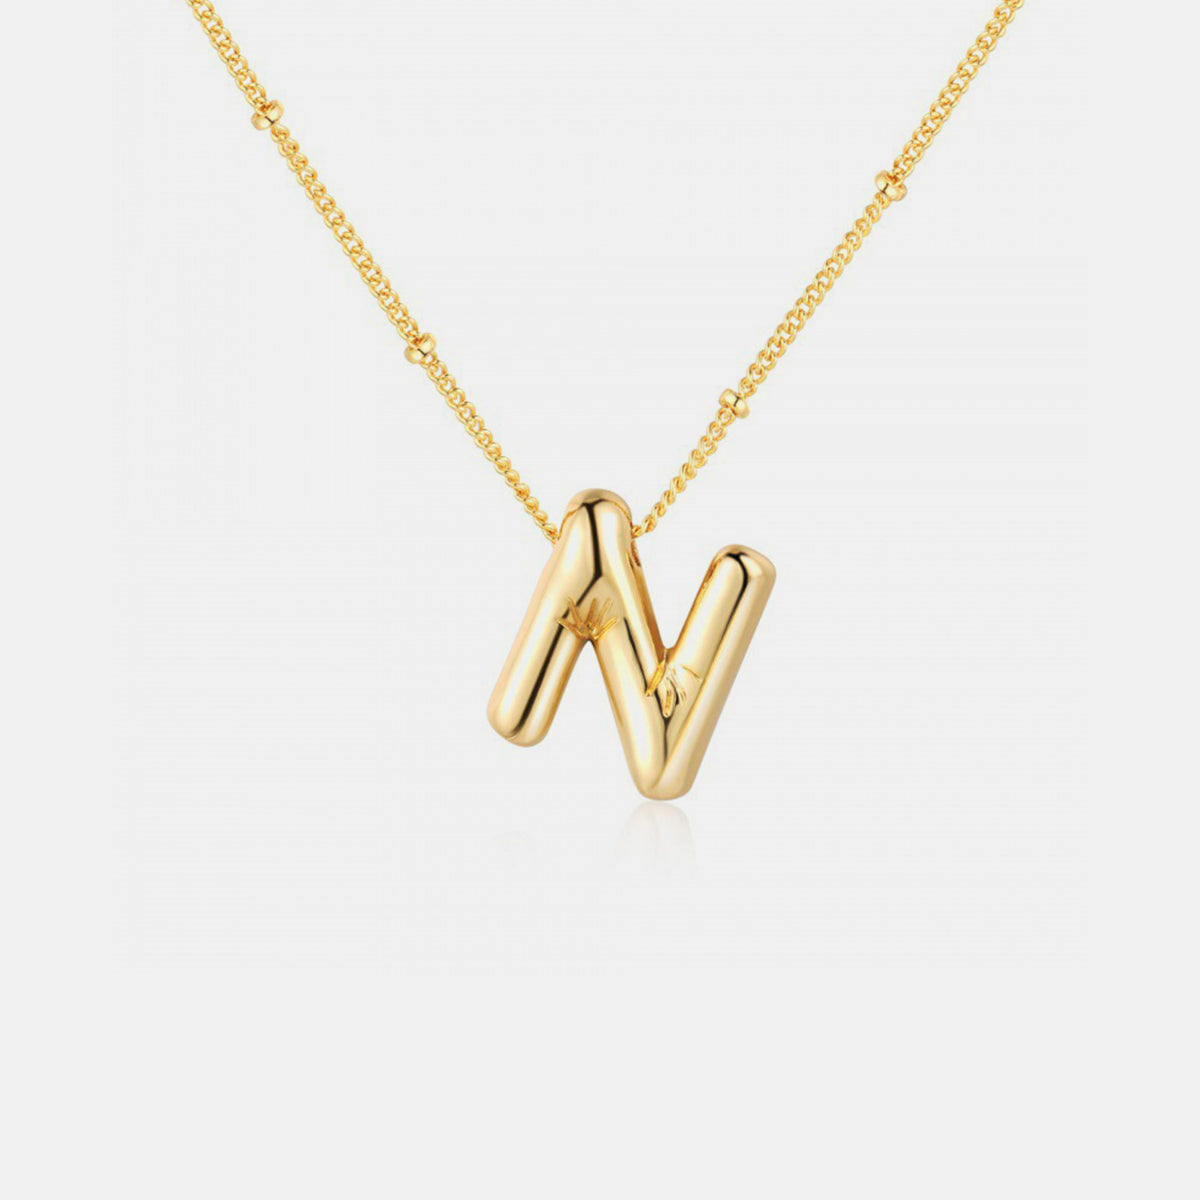 TEEK - K-S Gold-Plated Letter Pendant Necklace JEWELRY TEEK Trend Style N  